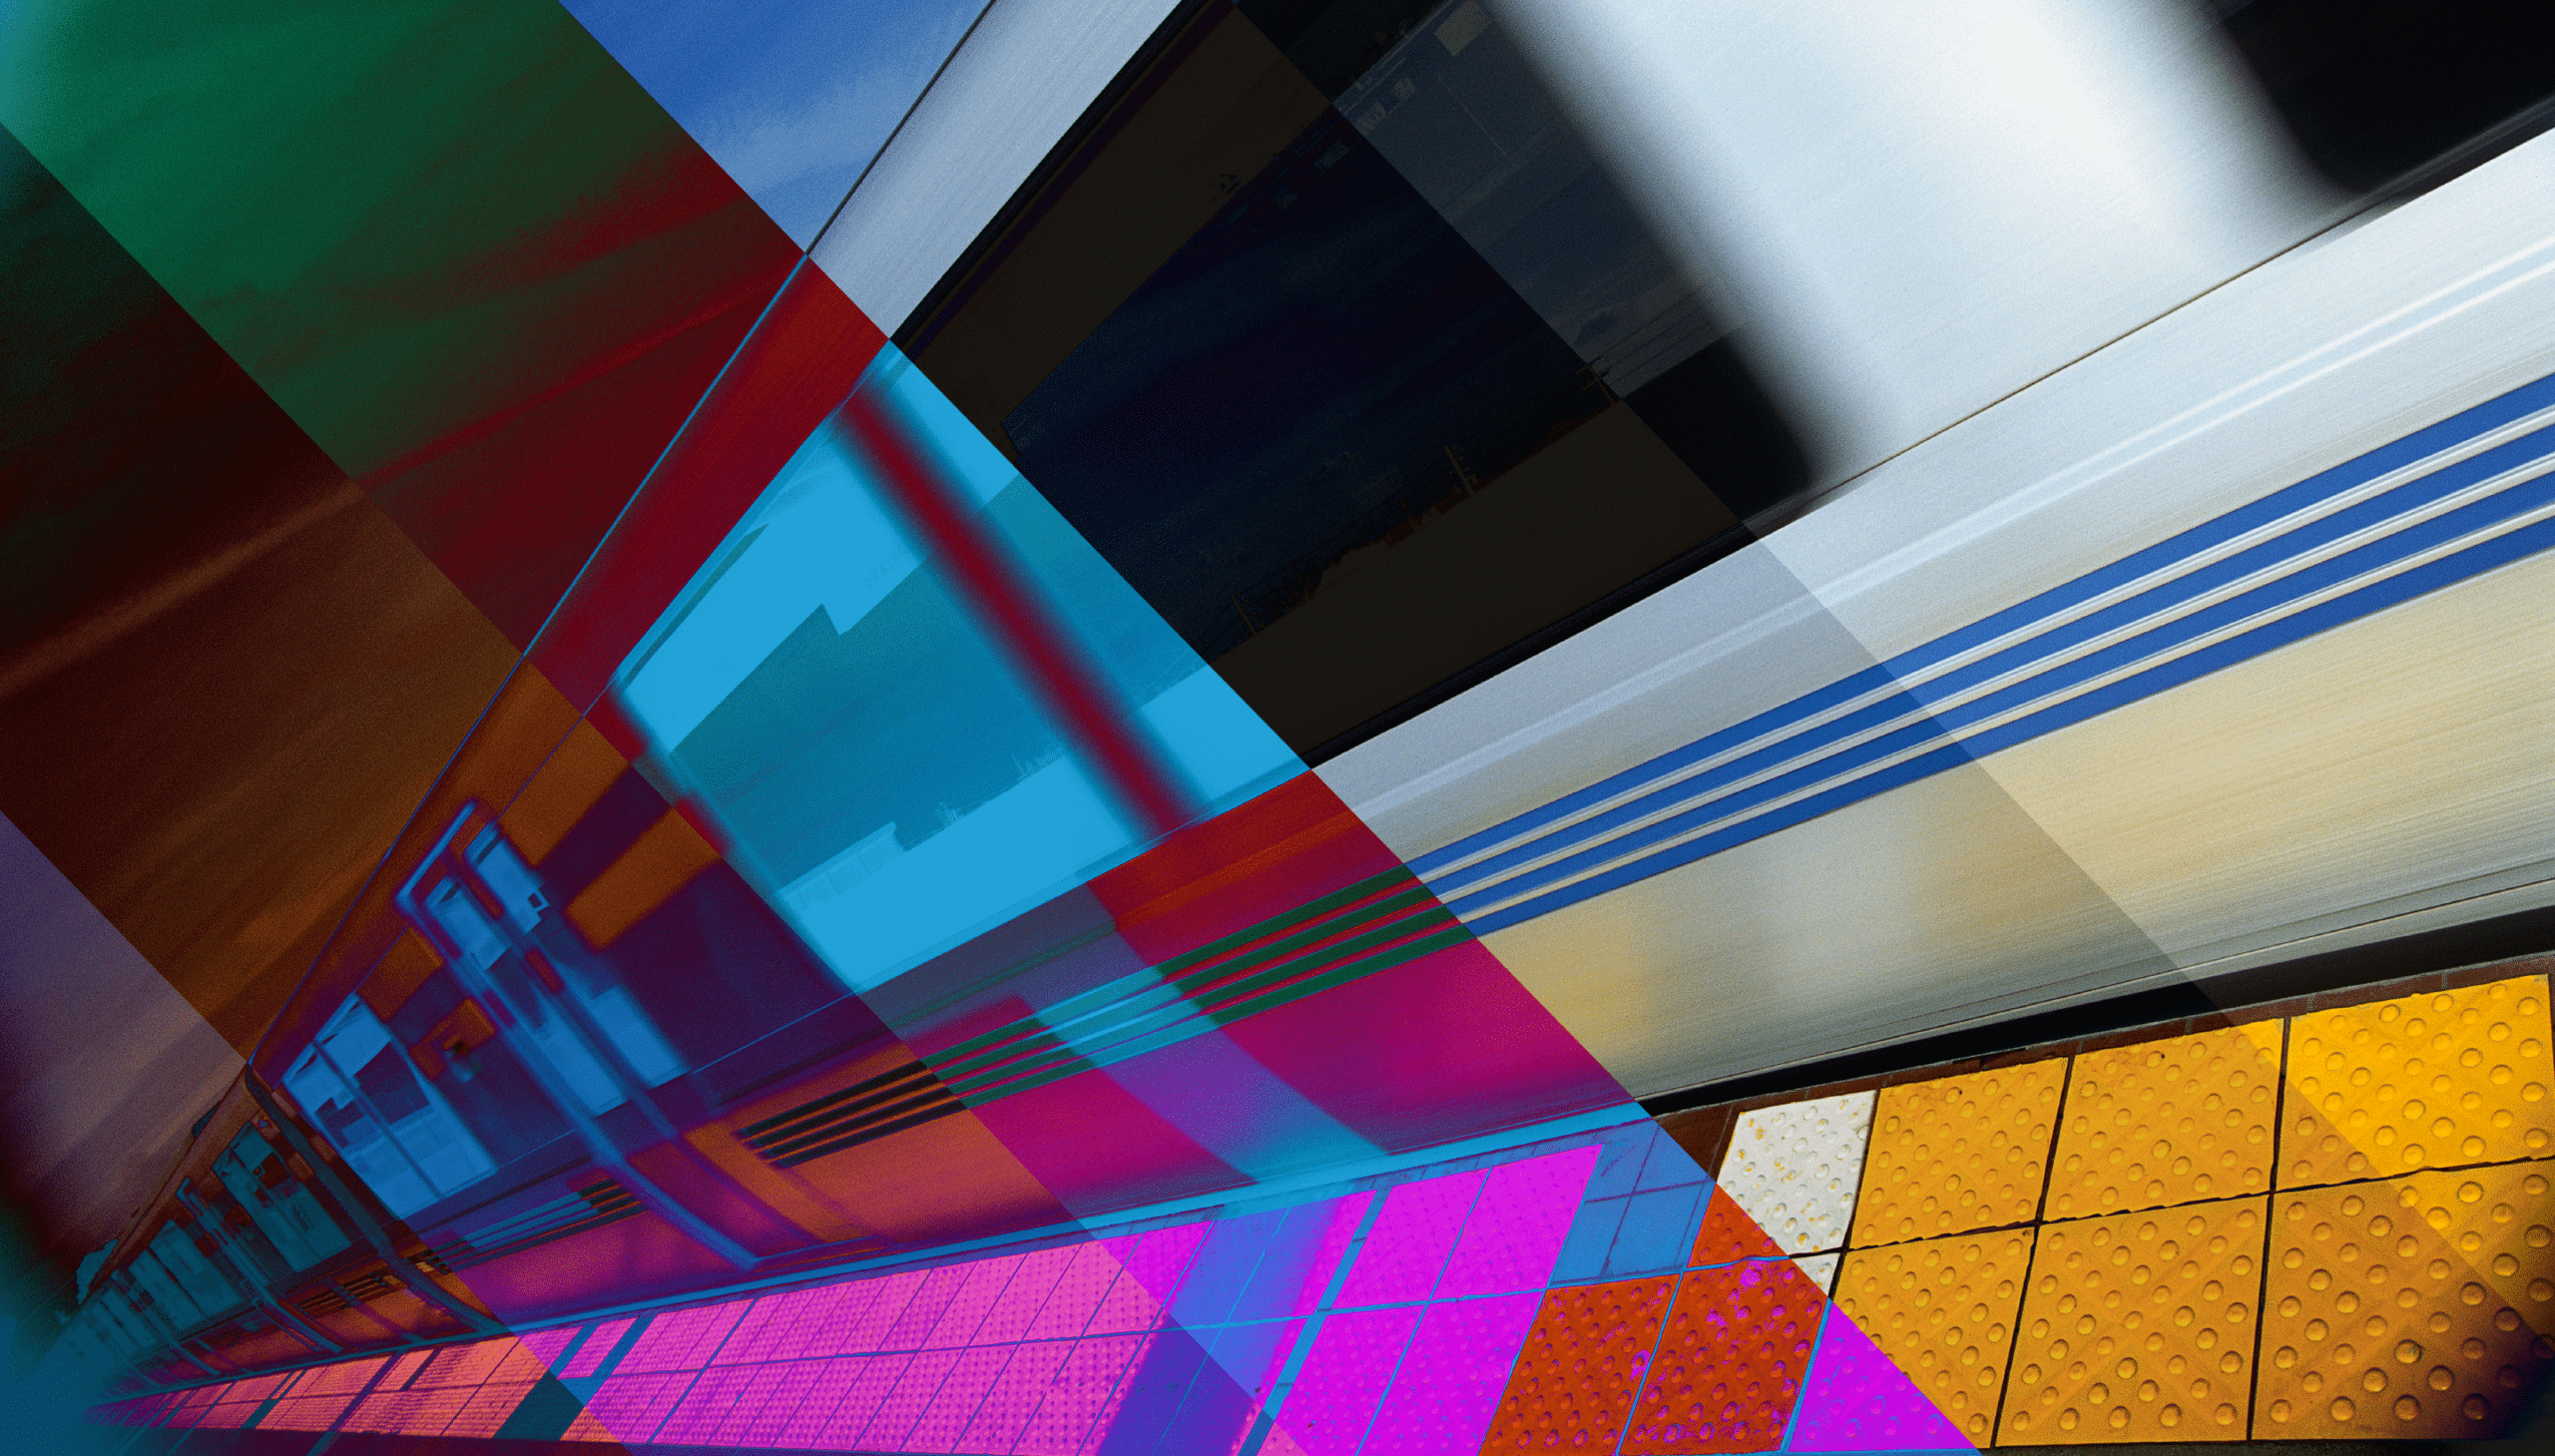 Abstract composite image of urban architectural elements with vibrant colors and geometric patterns.